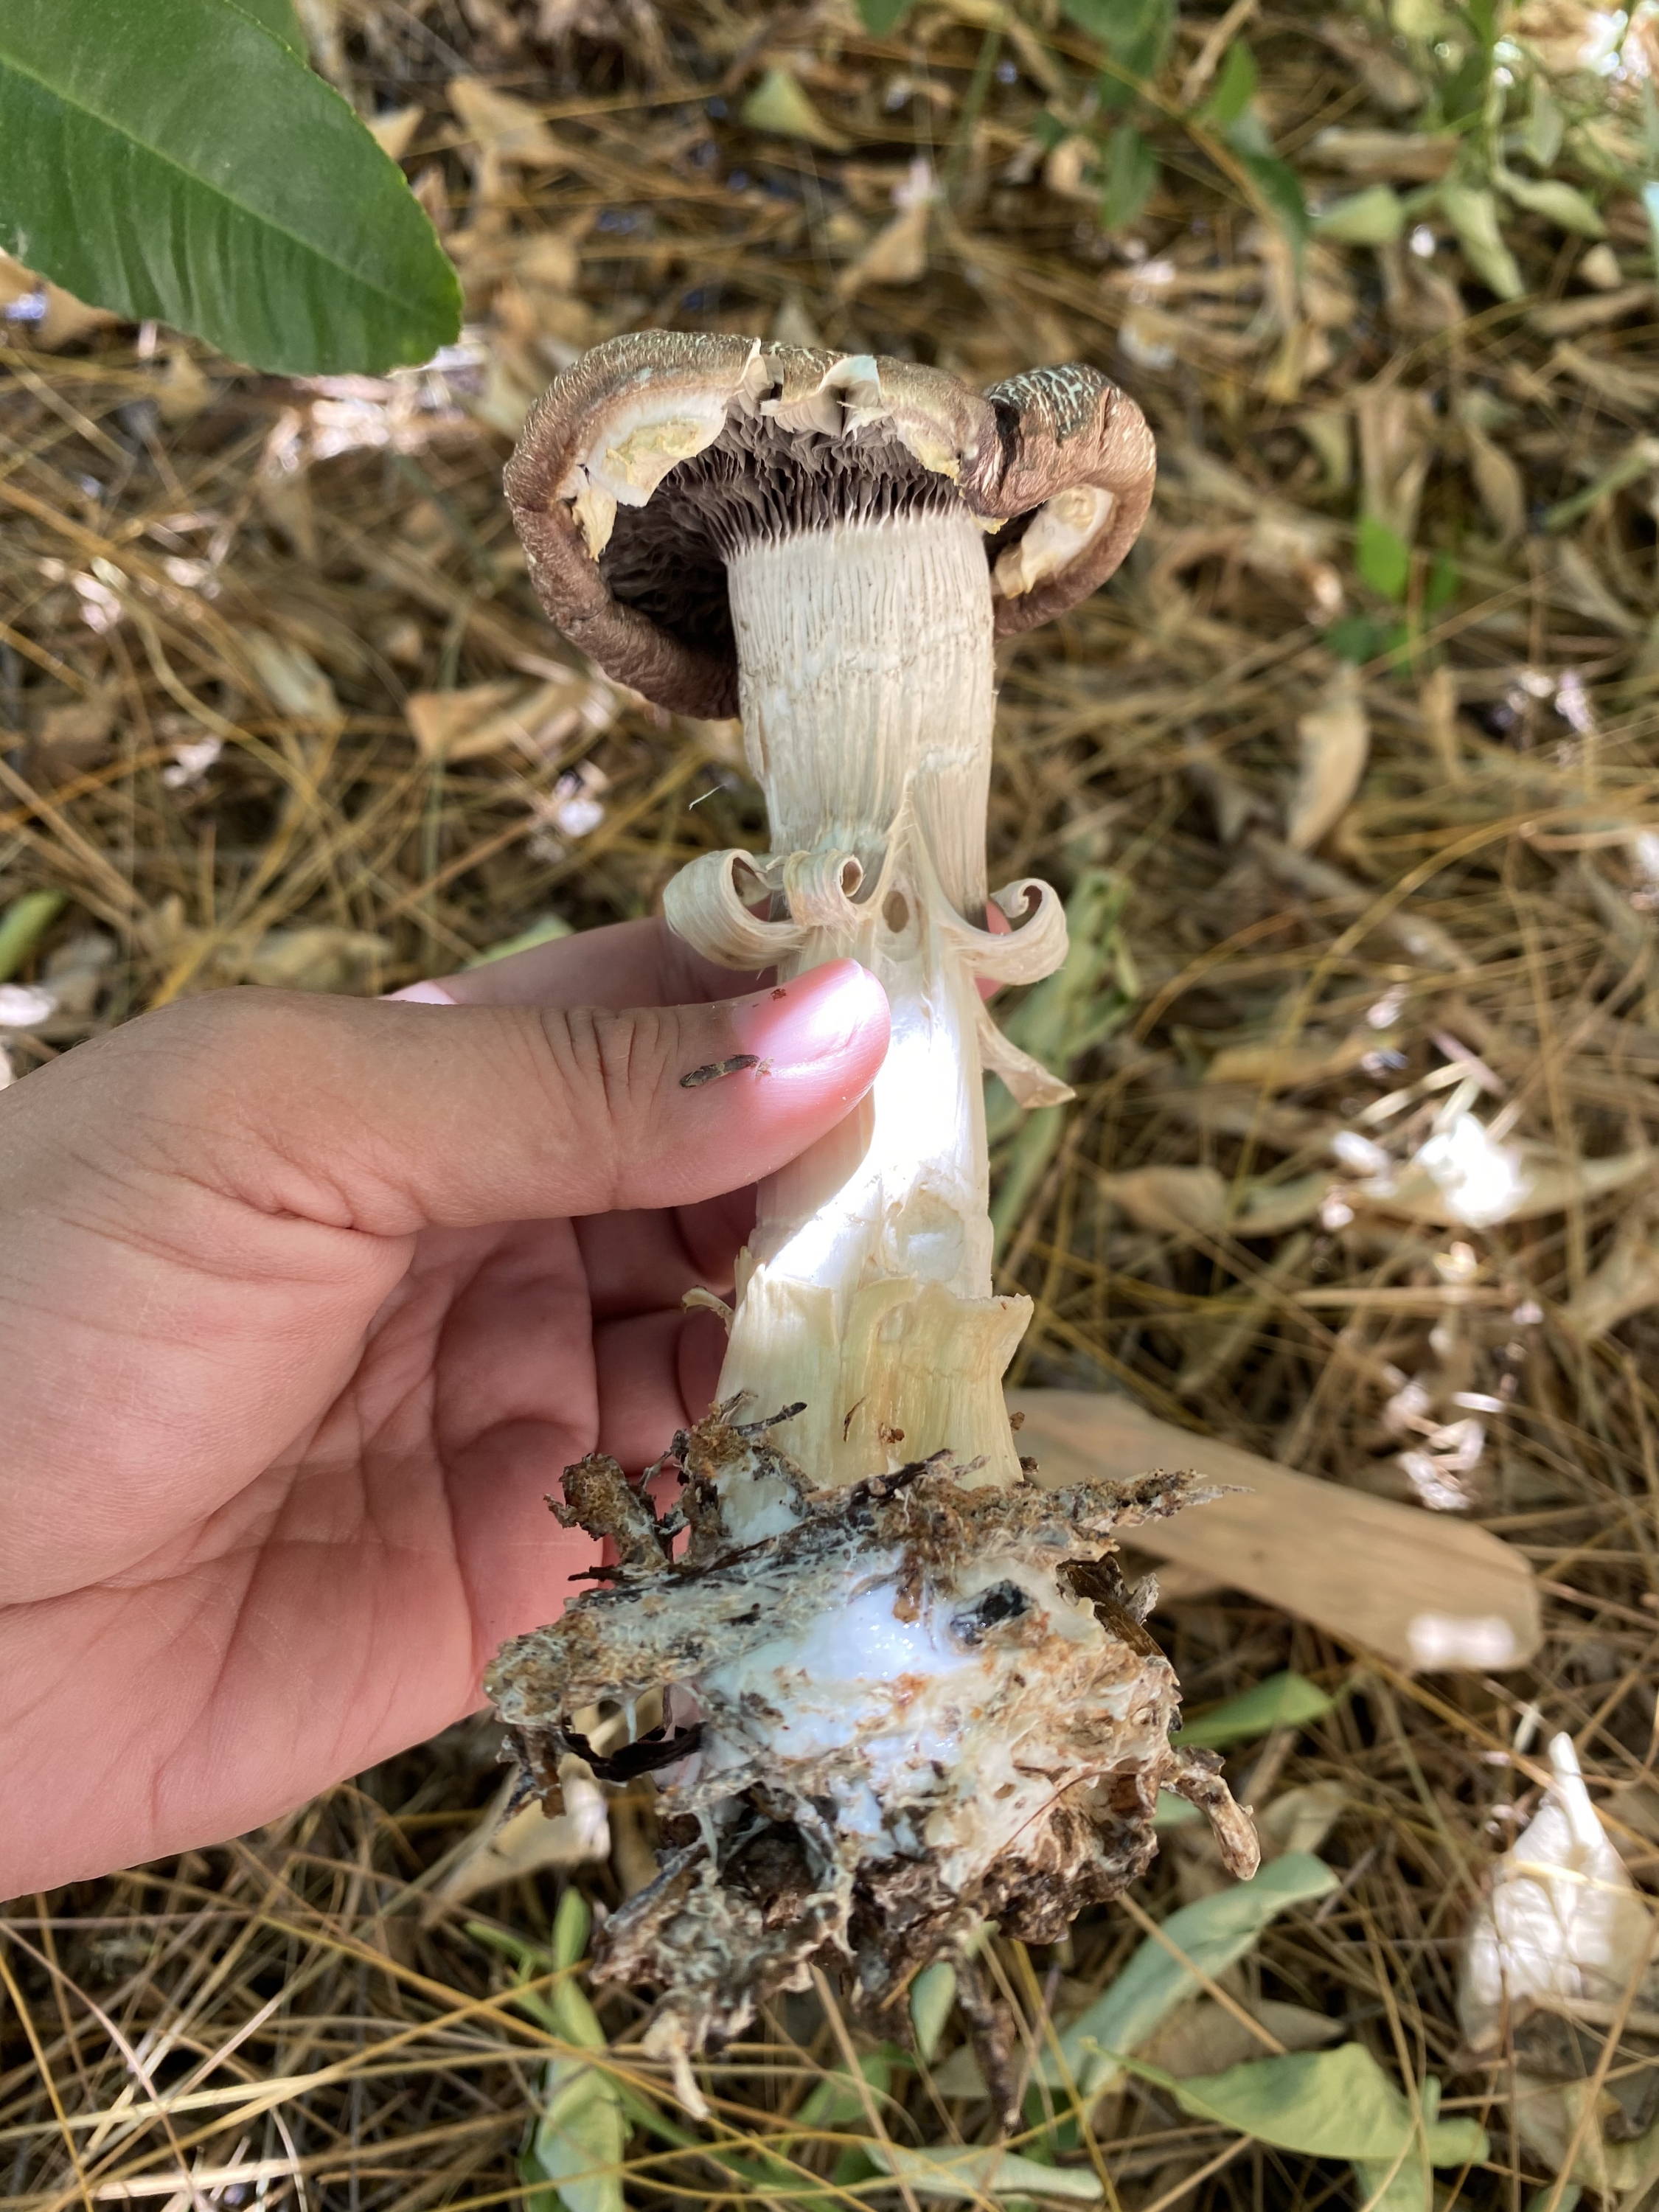 A Wine Cap mushroom with visible mycelium at the base of the stipe.